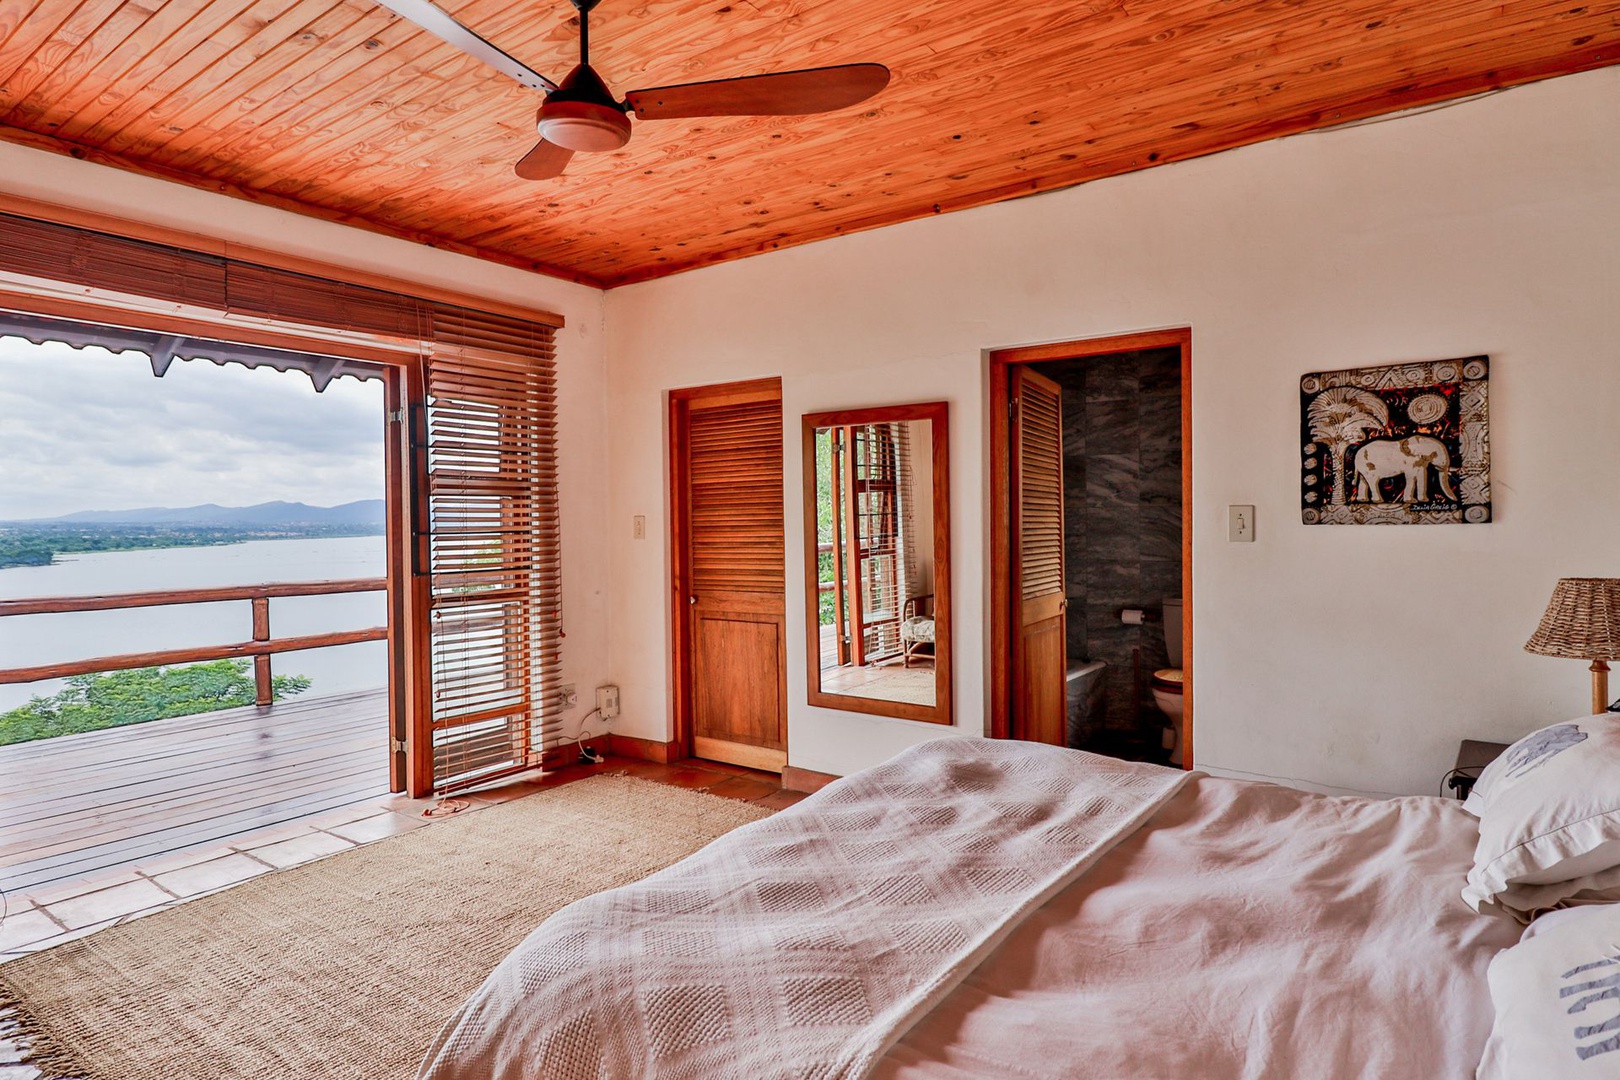 House in Kosmos - Main bedroom opens out on to deck with the most gorgeous views!